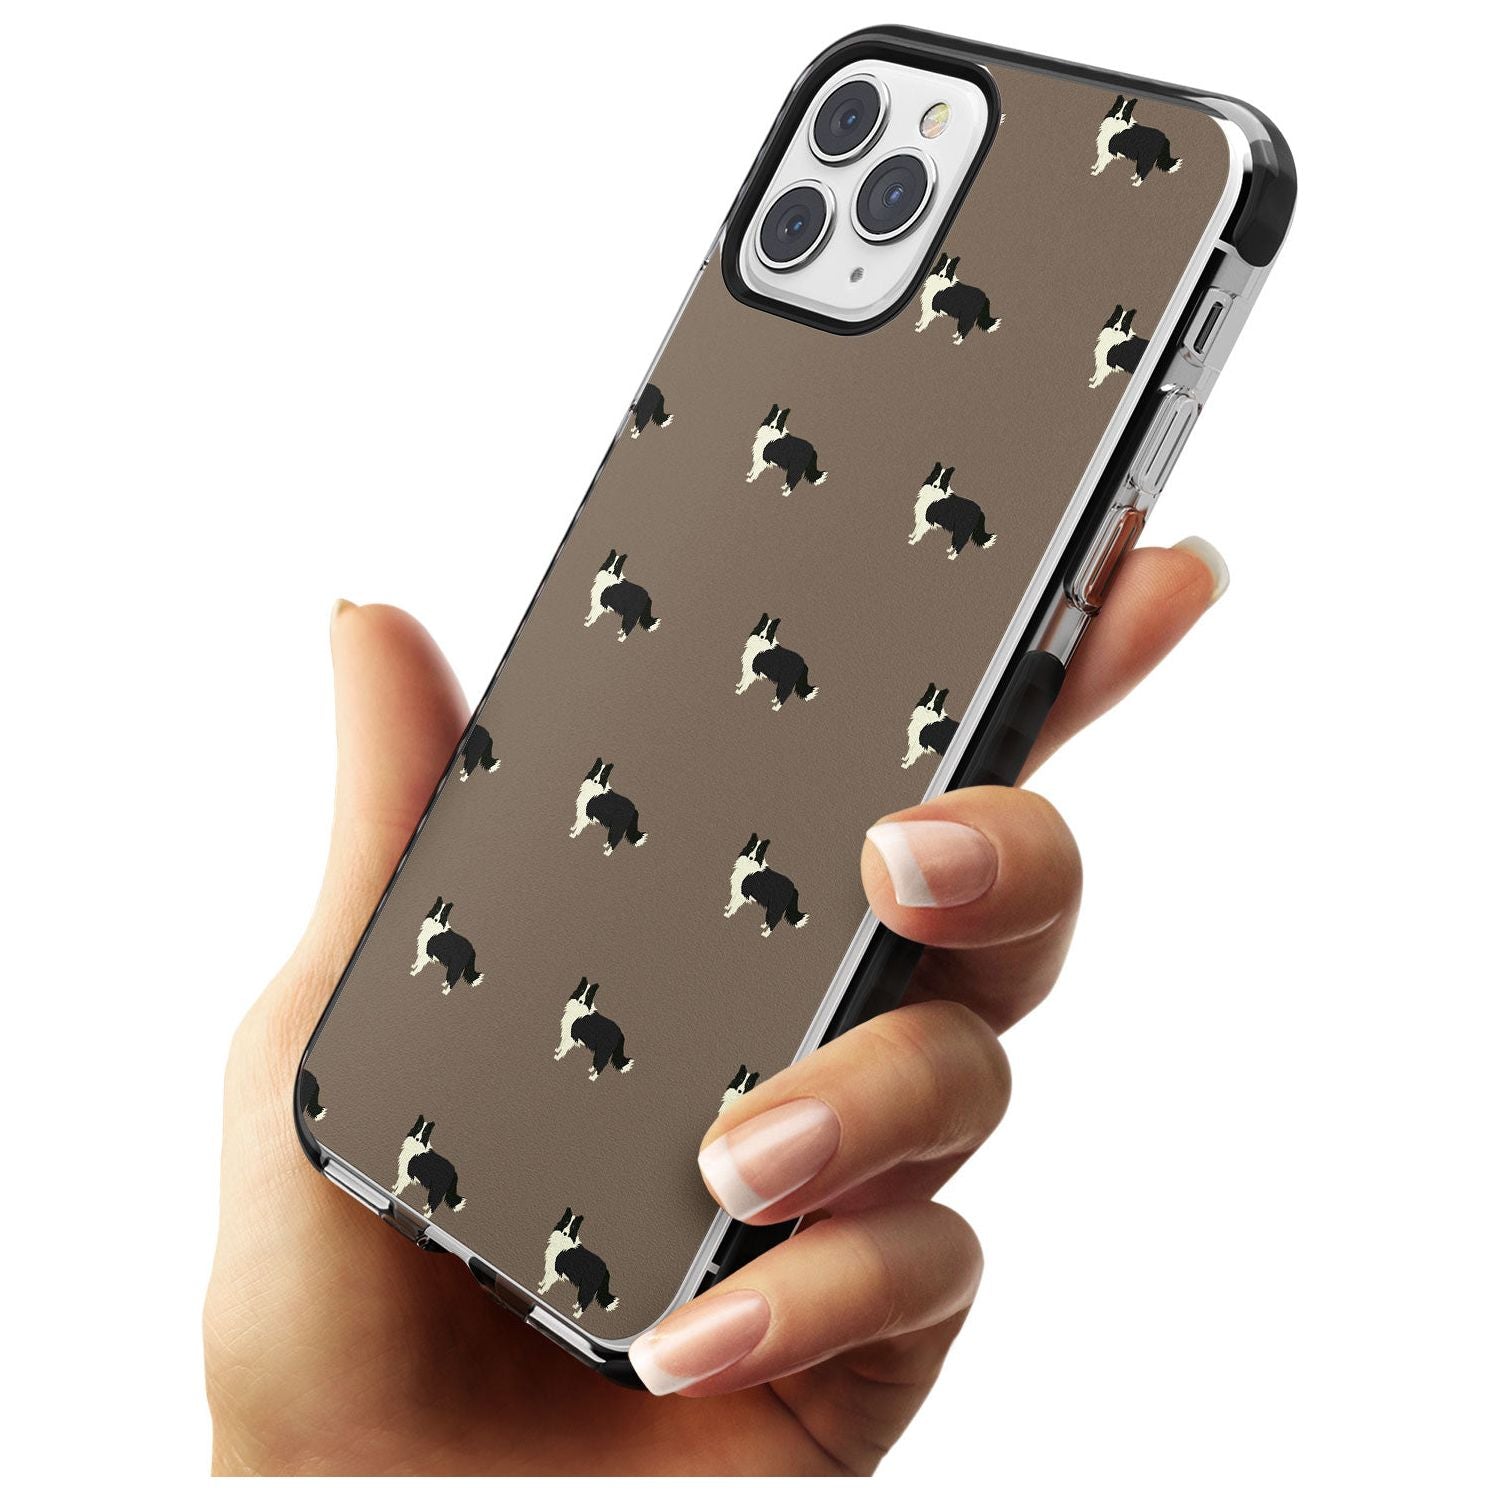 Border Collie Dog Pattern Black Impact Phone Case for iPhone 11 Pro Max